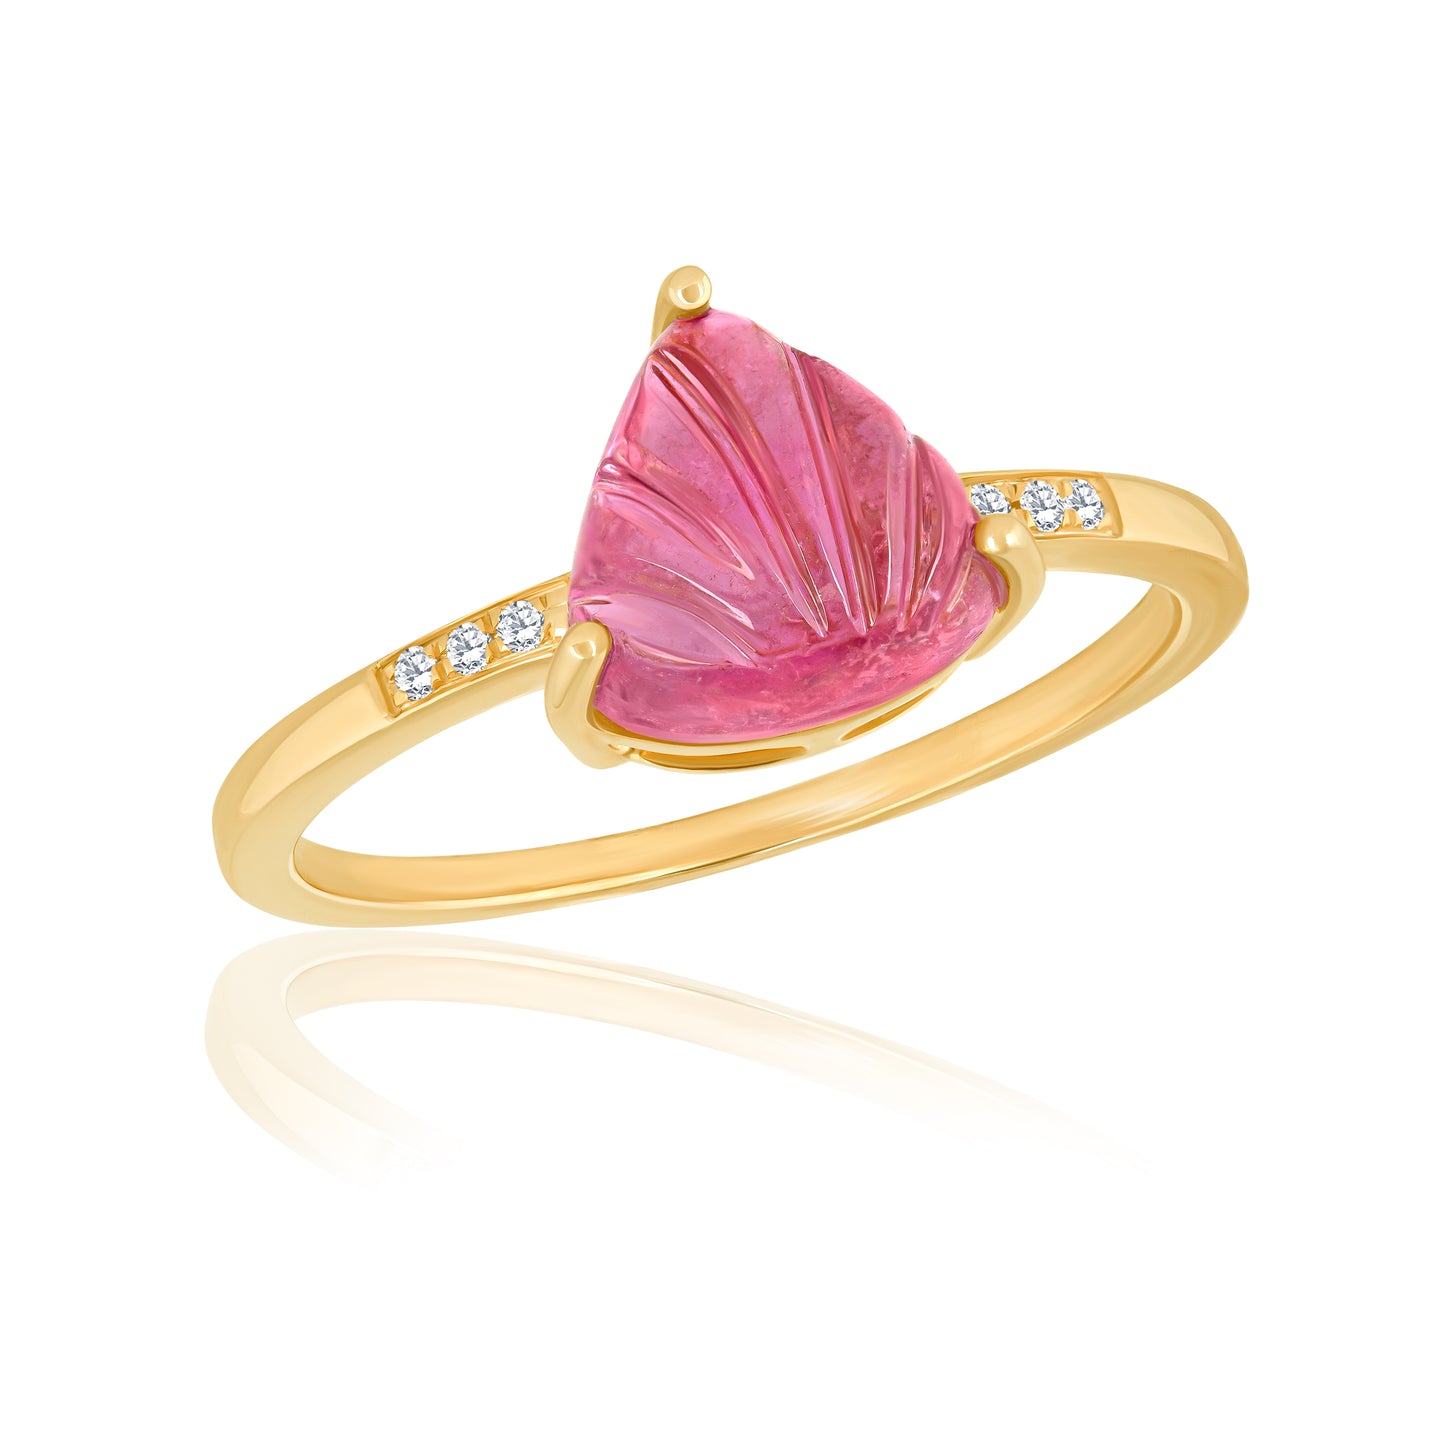 14k Ring With Carved Pink Tourmaline & Natural Diamonds For Women